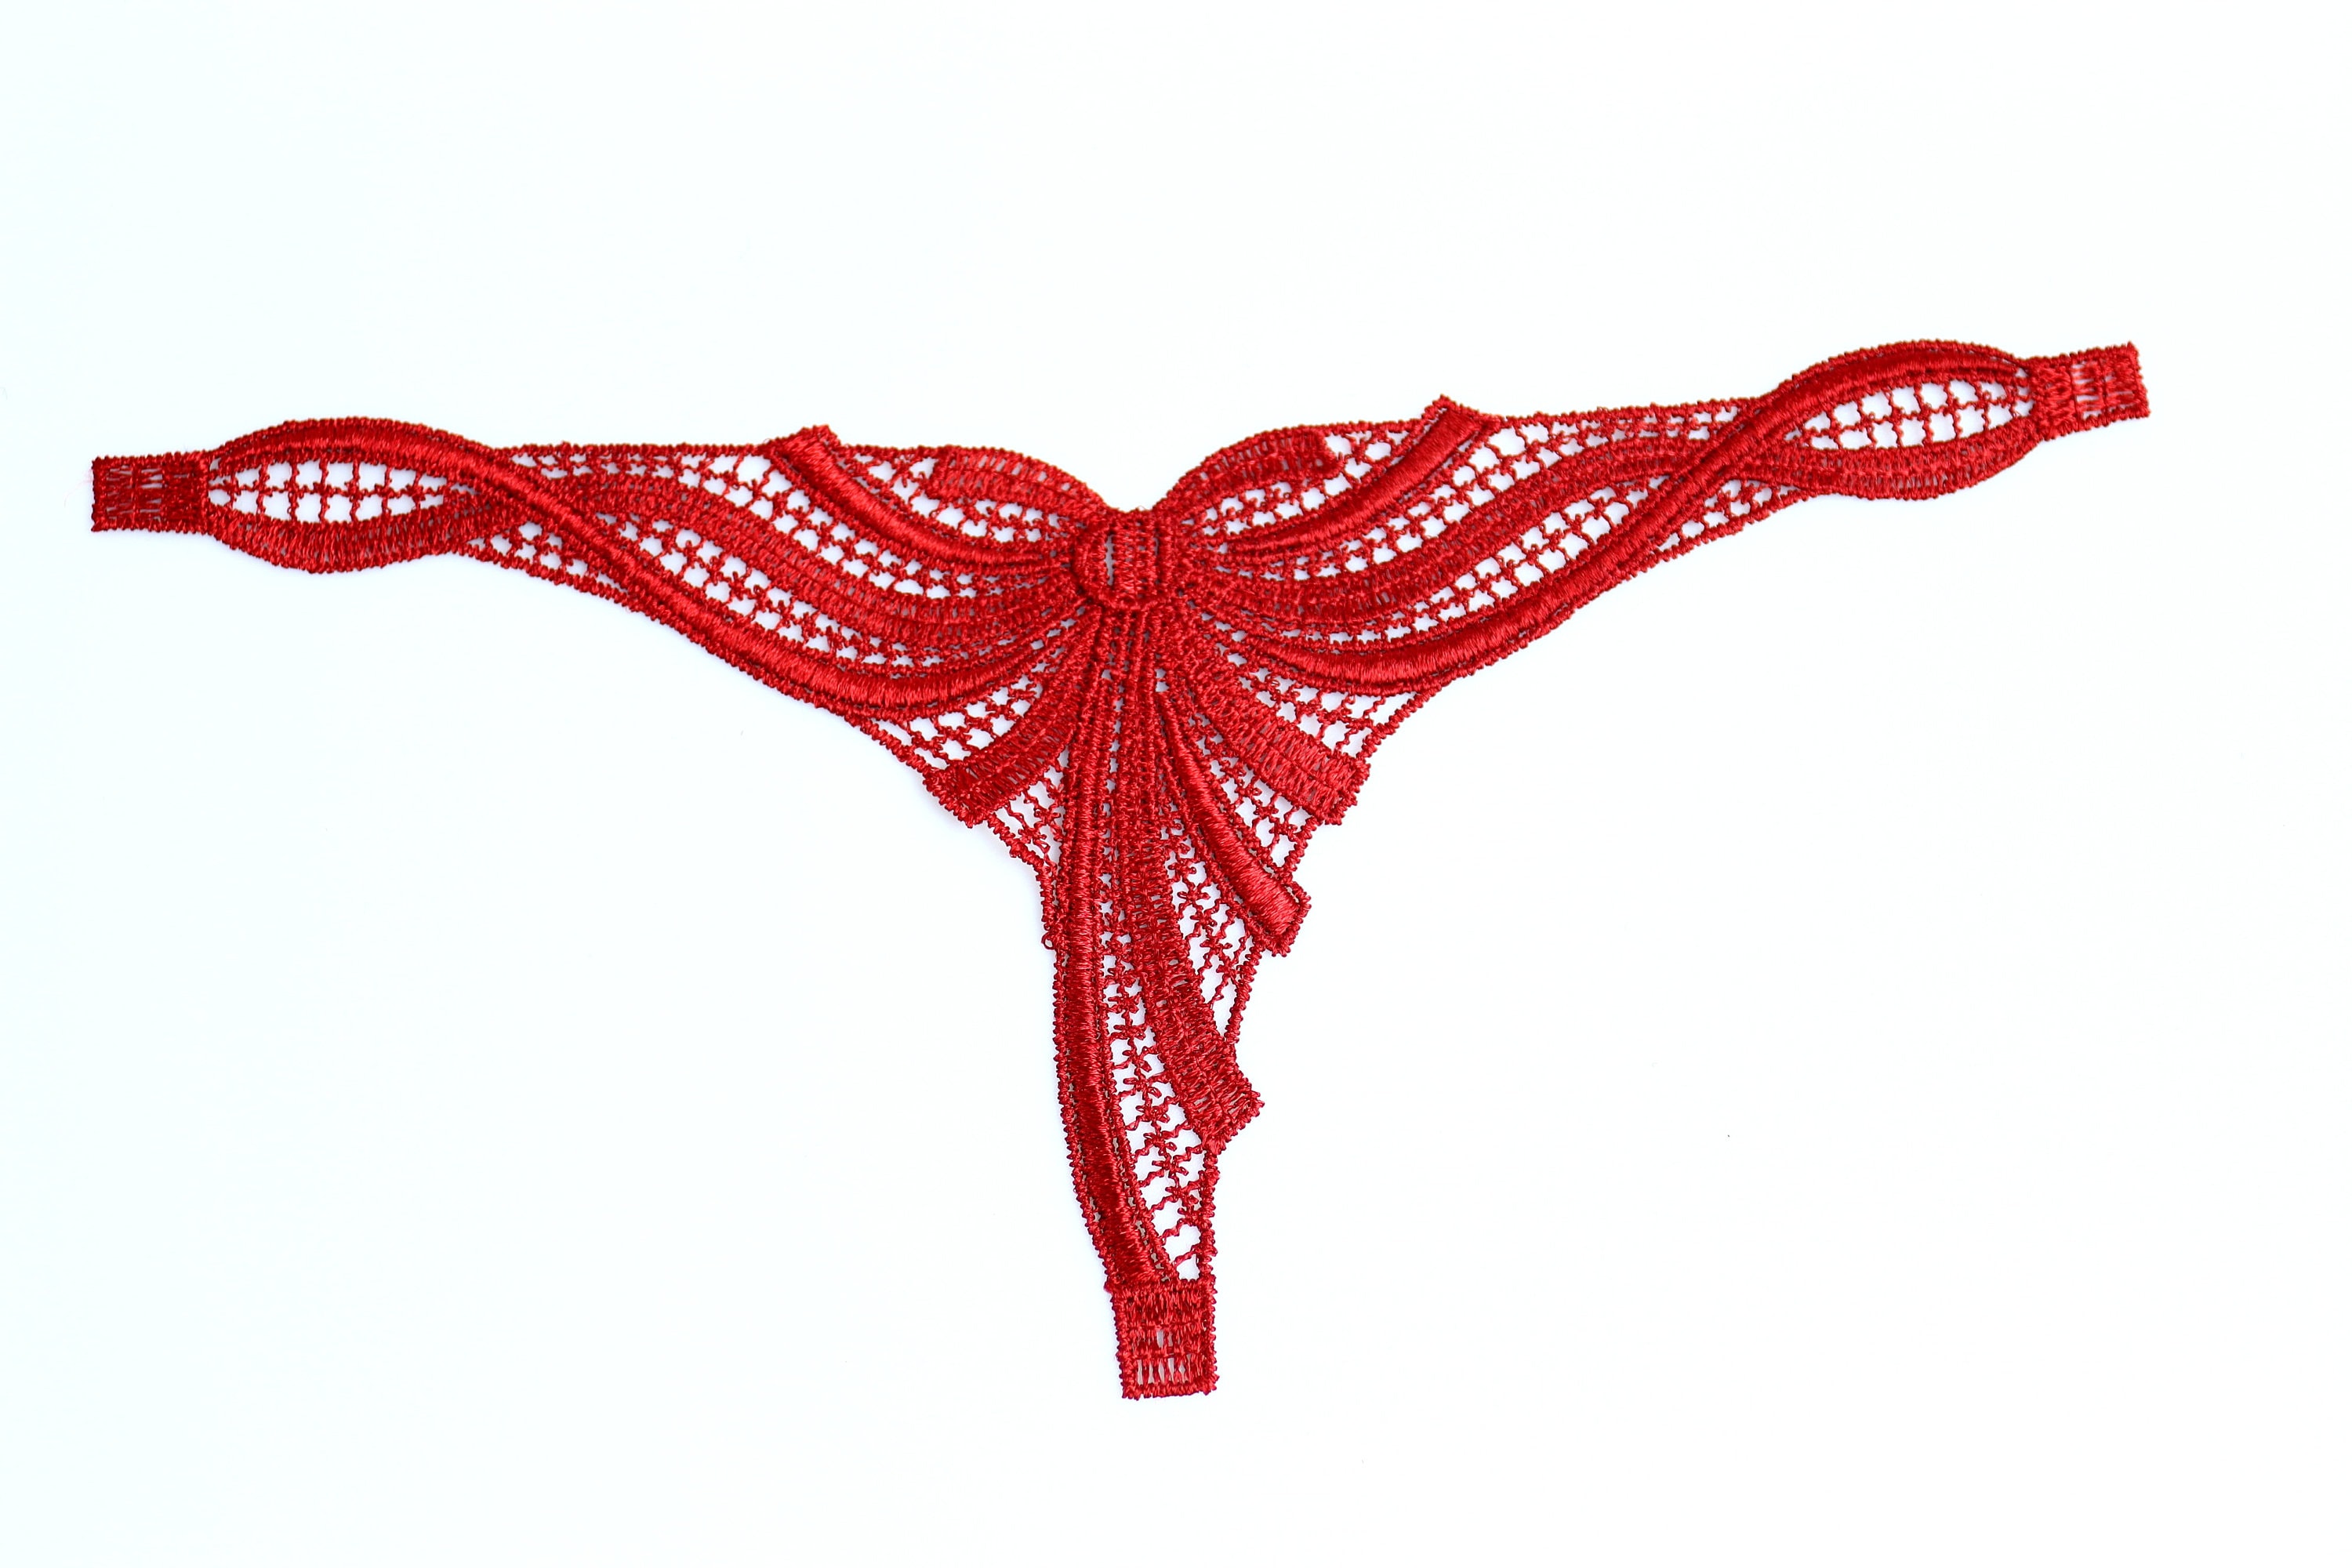 Buy Lace Trim Thong Online In India -  India